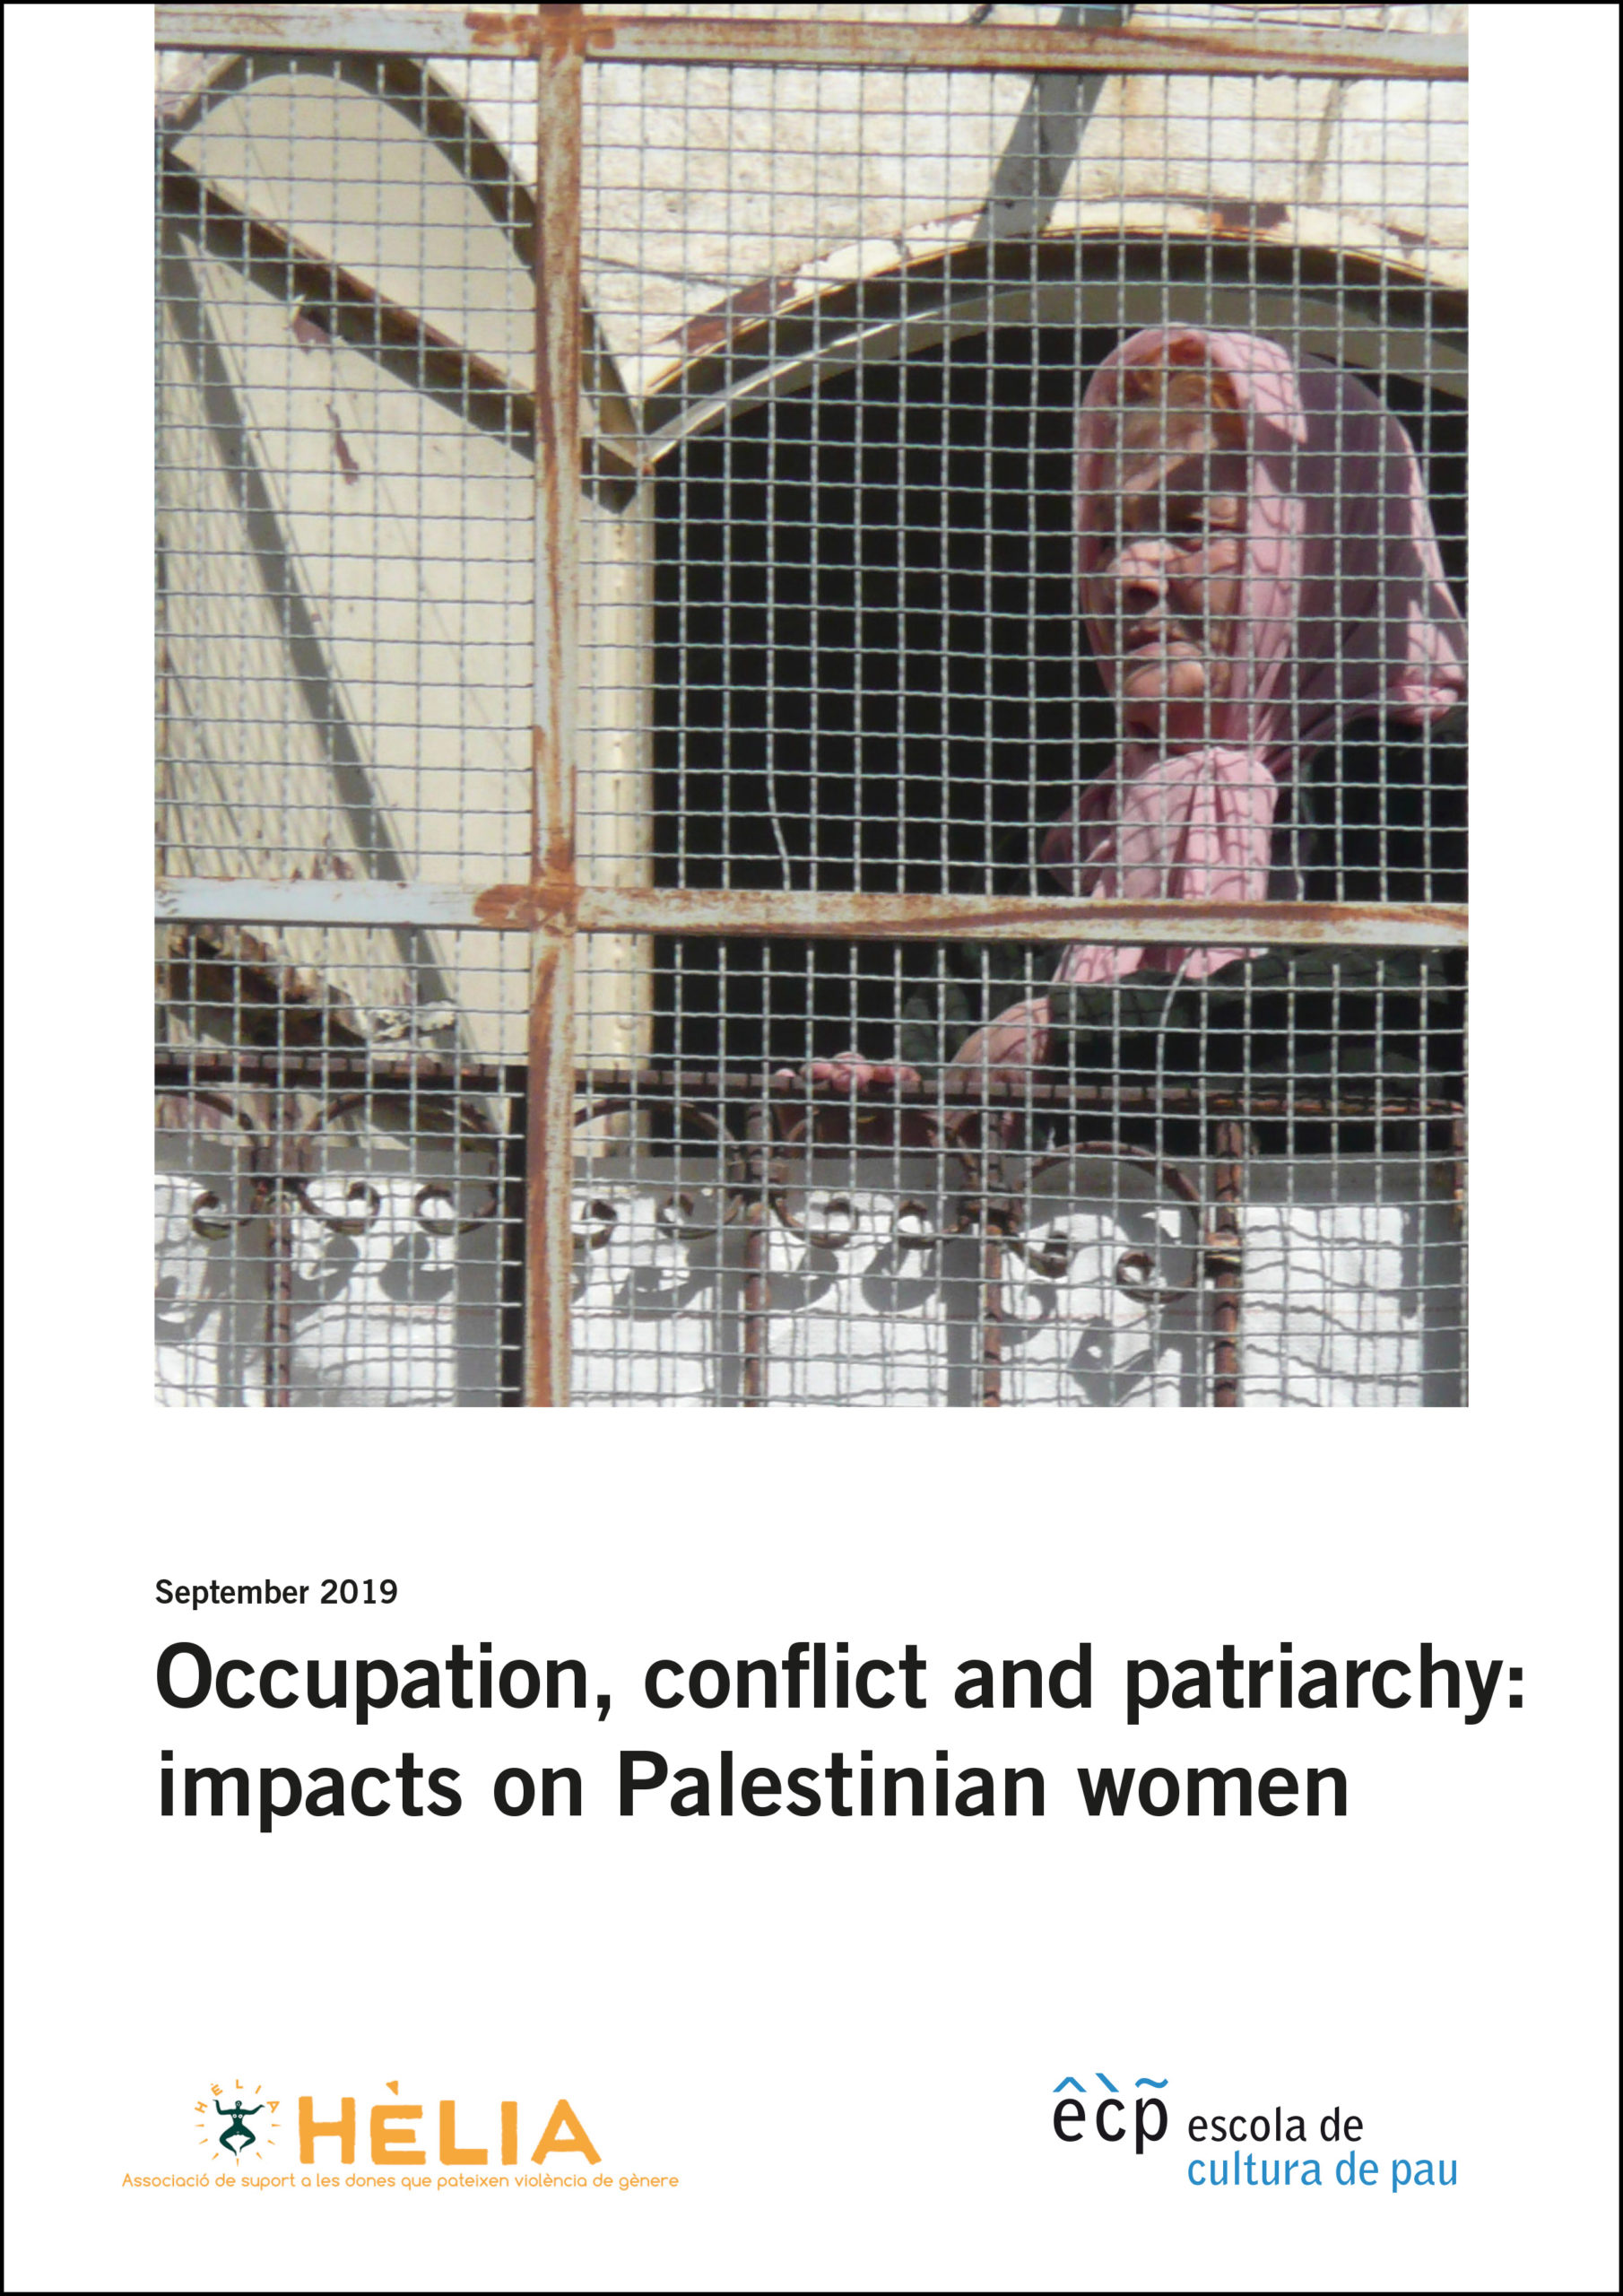 Occupation, conflict and patriarchy: Impacts on Palestinian women.